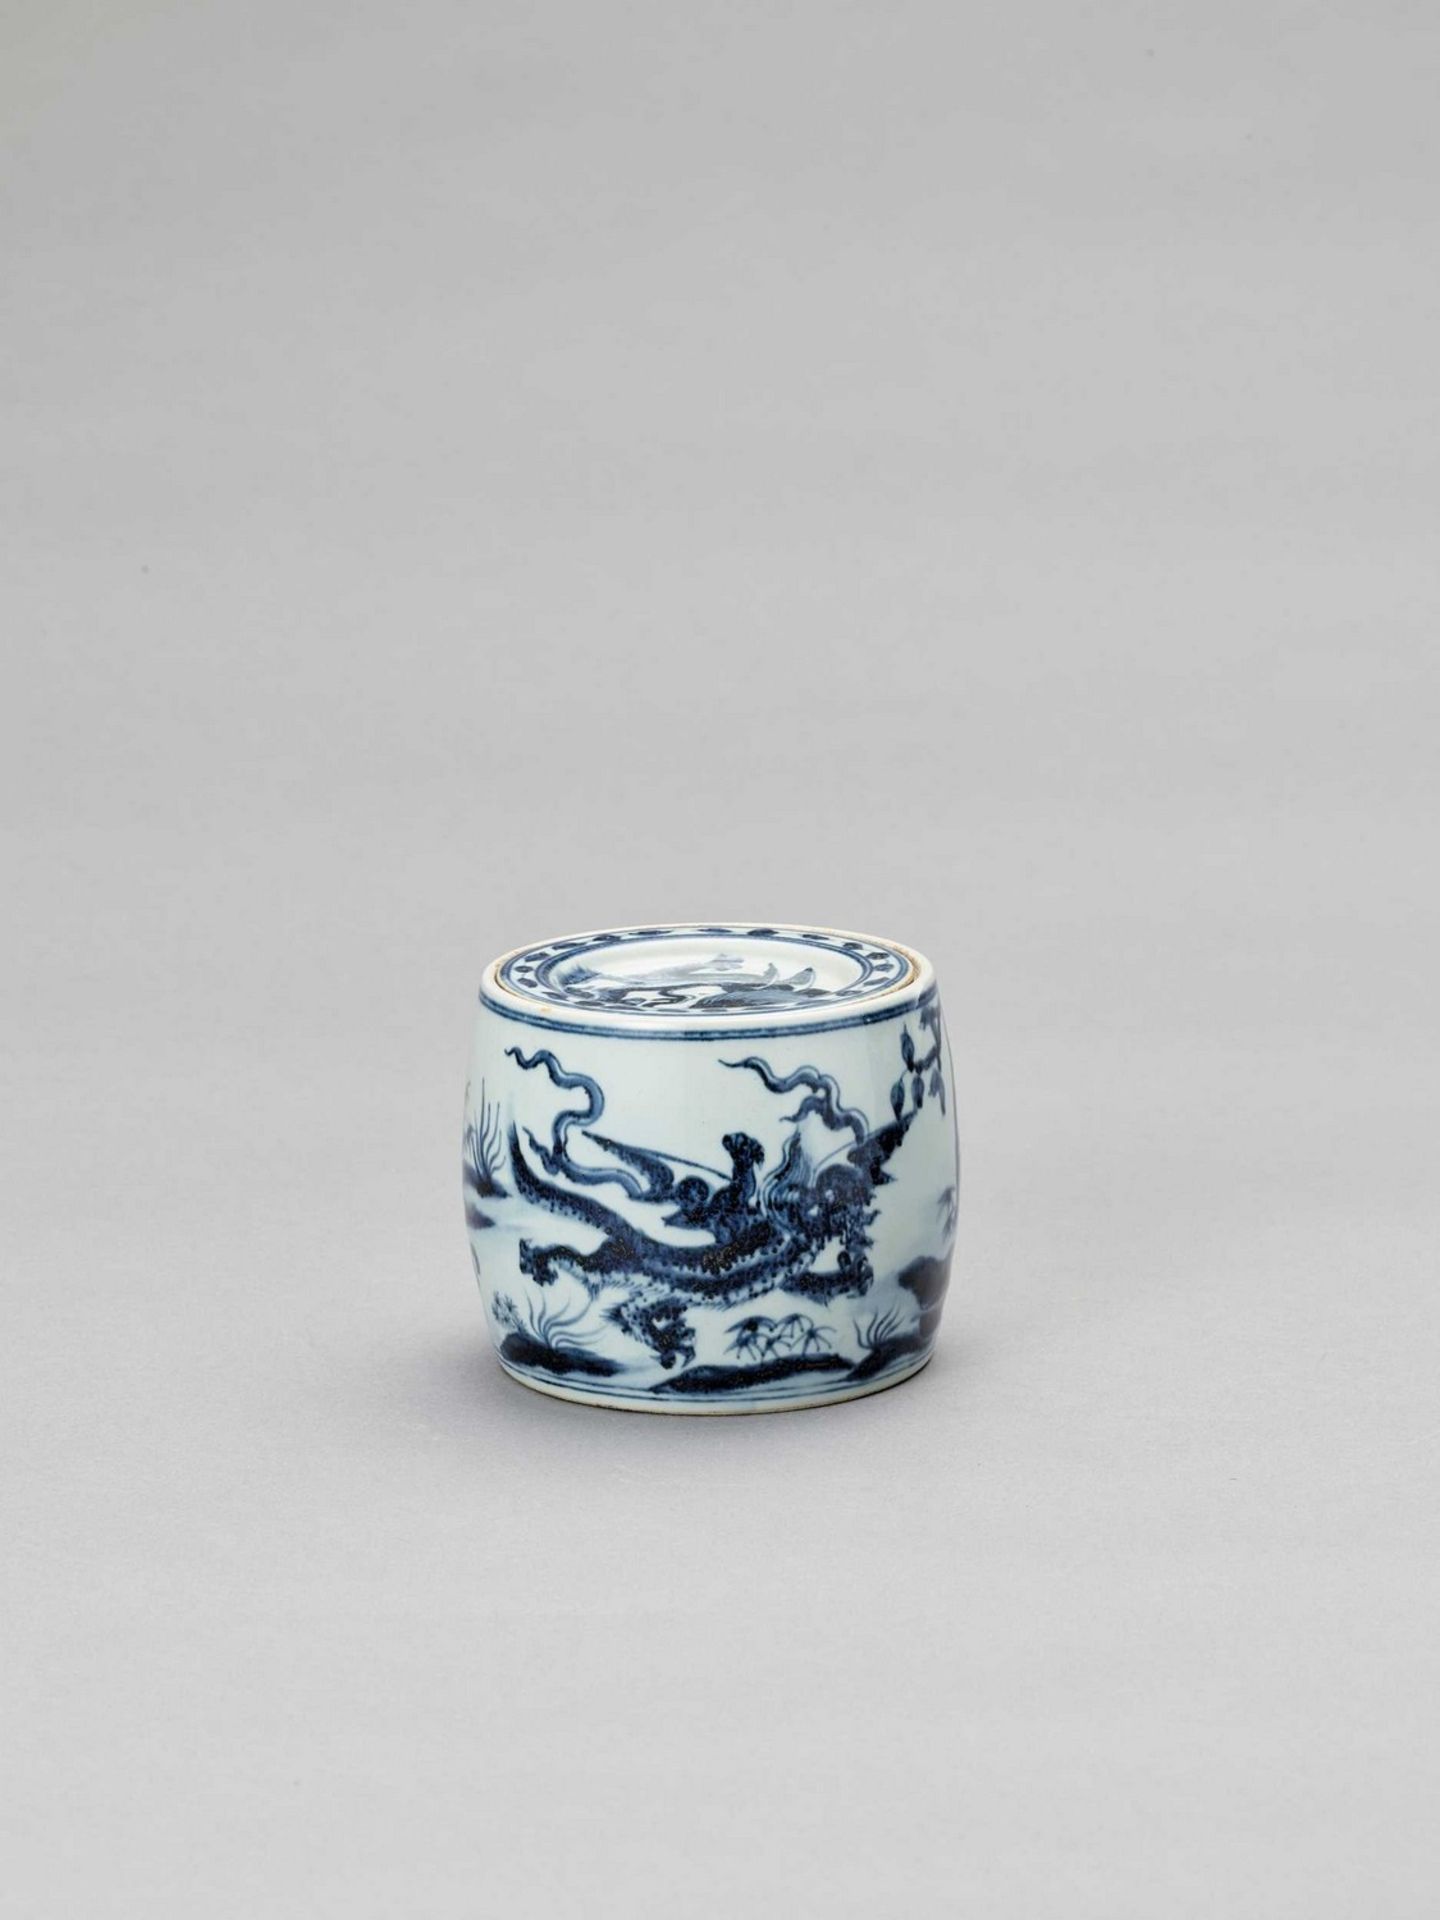 A BLUE AND WHITE PORCELAIN ‘DRAGON’ JAR AND COVER, LATE QING TO REPUBLIC